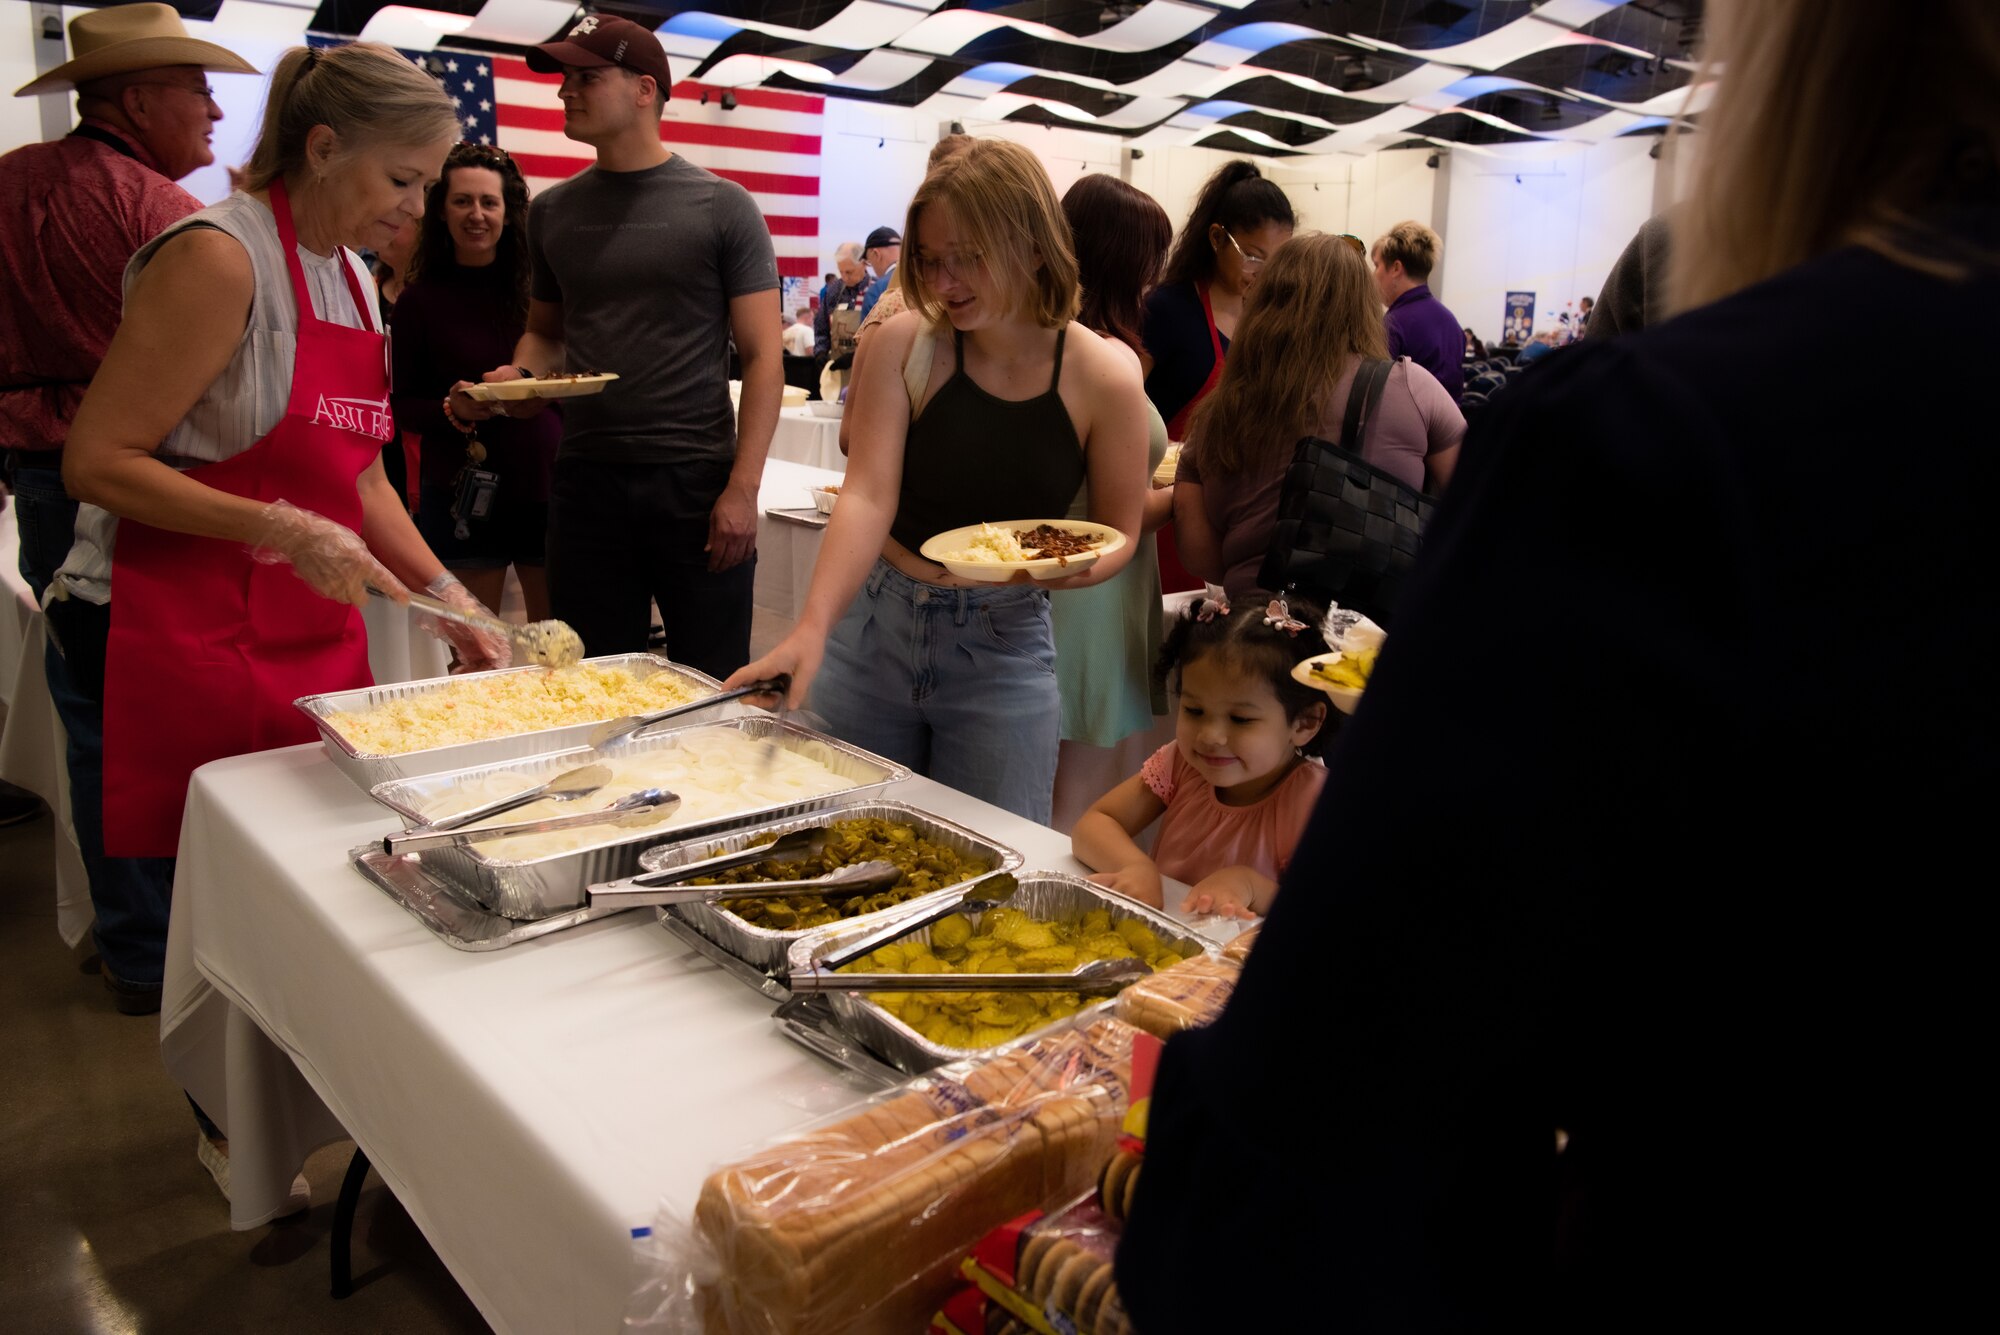 Military families are served food at the World’s Largest BBQ hosted at the Abilene Convention Center in Abilene, Texas, April 15, 2023. The Abilene Military Affairs Committee hosted the 58th Annual World’s Largest BBQ honoring military personnel and their service. (U.S. Air Force photo by Airman 1st Class Alondra Cristobal Hernandez)